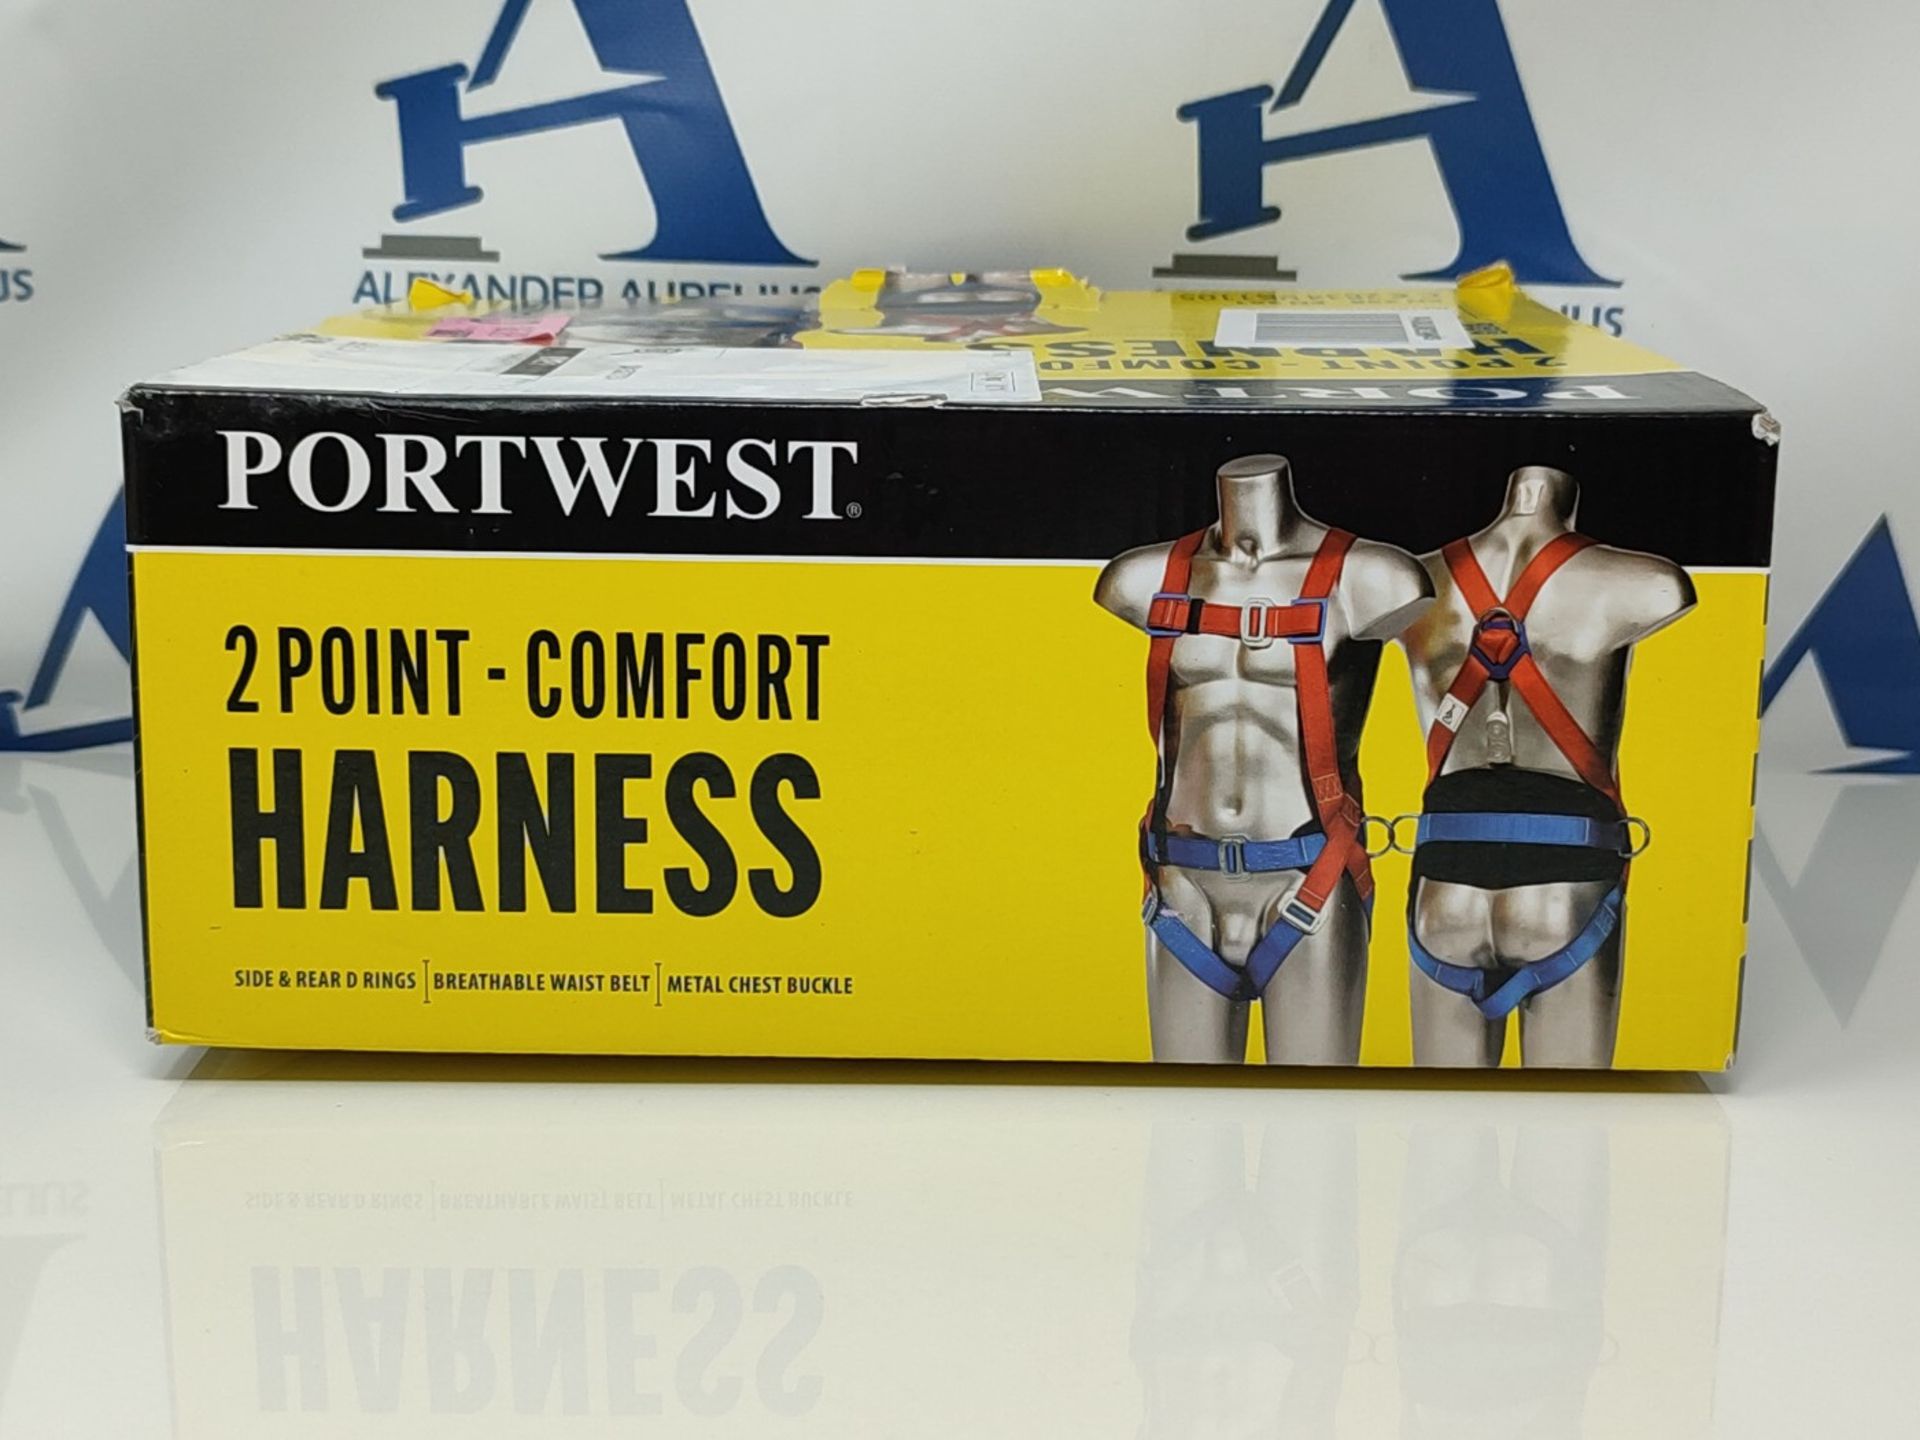 Portwest Portwest 2 Point Comfort Harness, Size: One Size, Colour: Red, FP14RER - Image 2 of 3